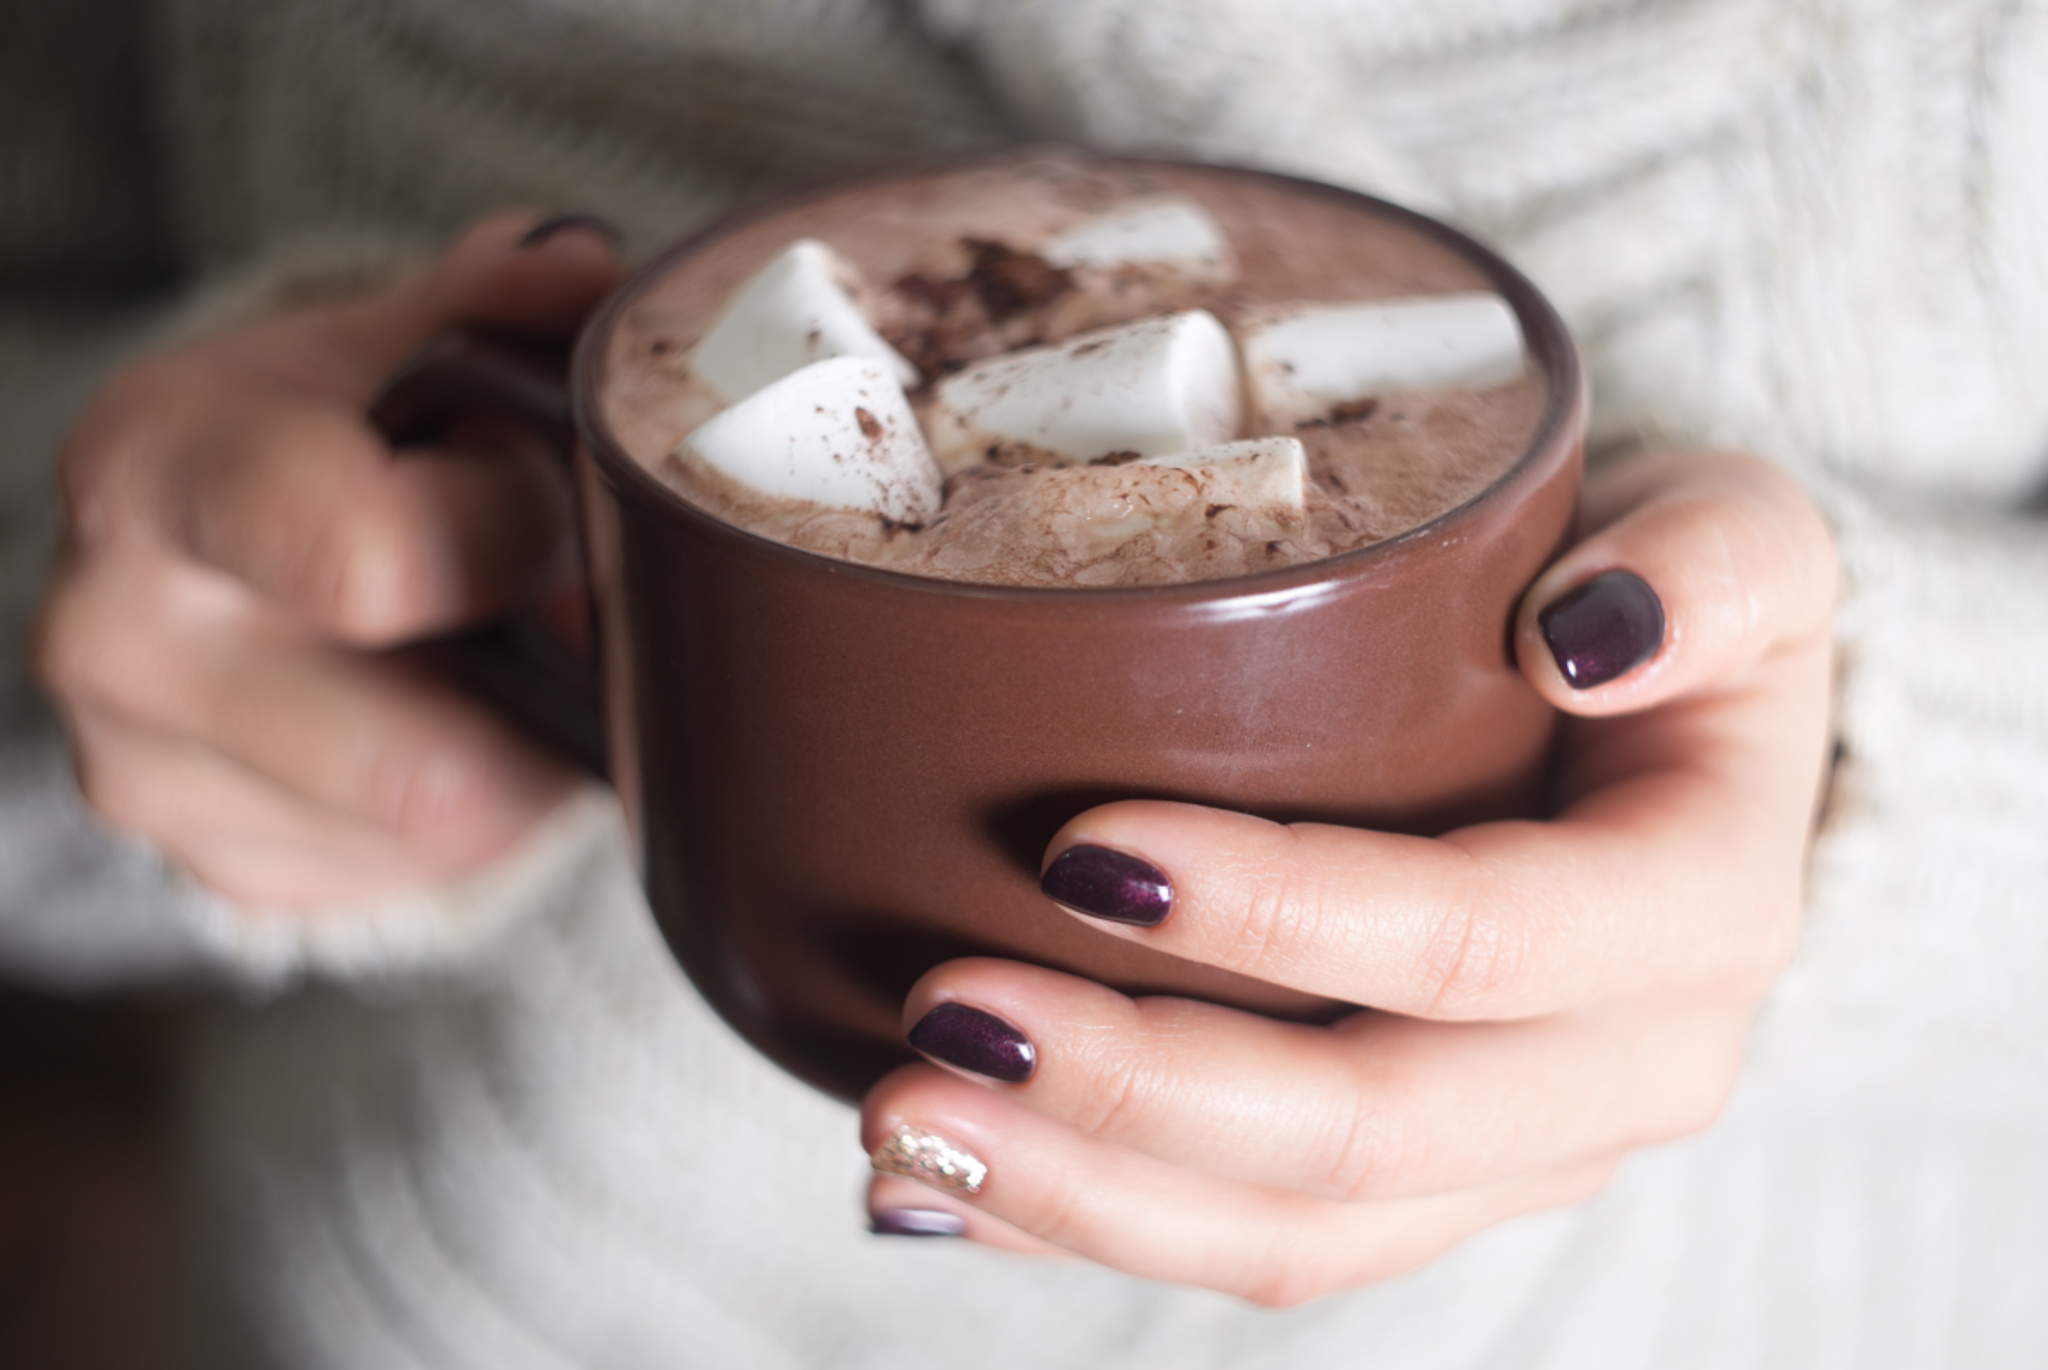 Hot Chocolate Hugs Essential Oil Blend- Smells Just Like A Warm Indulgent  Cup Of Creamy Cocoa